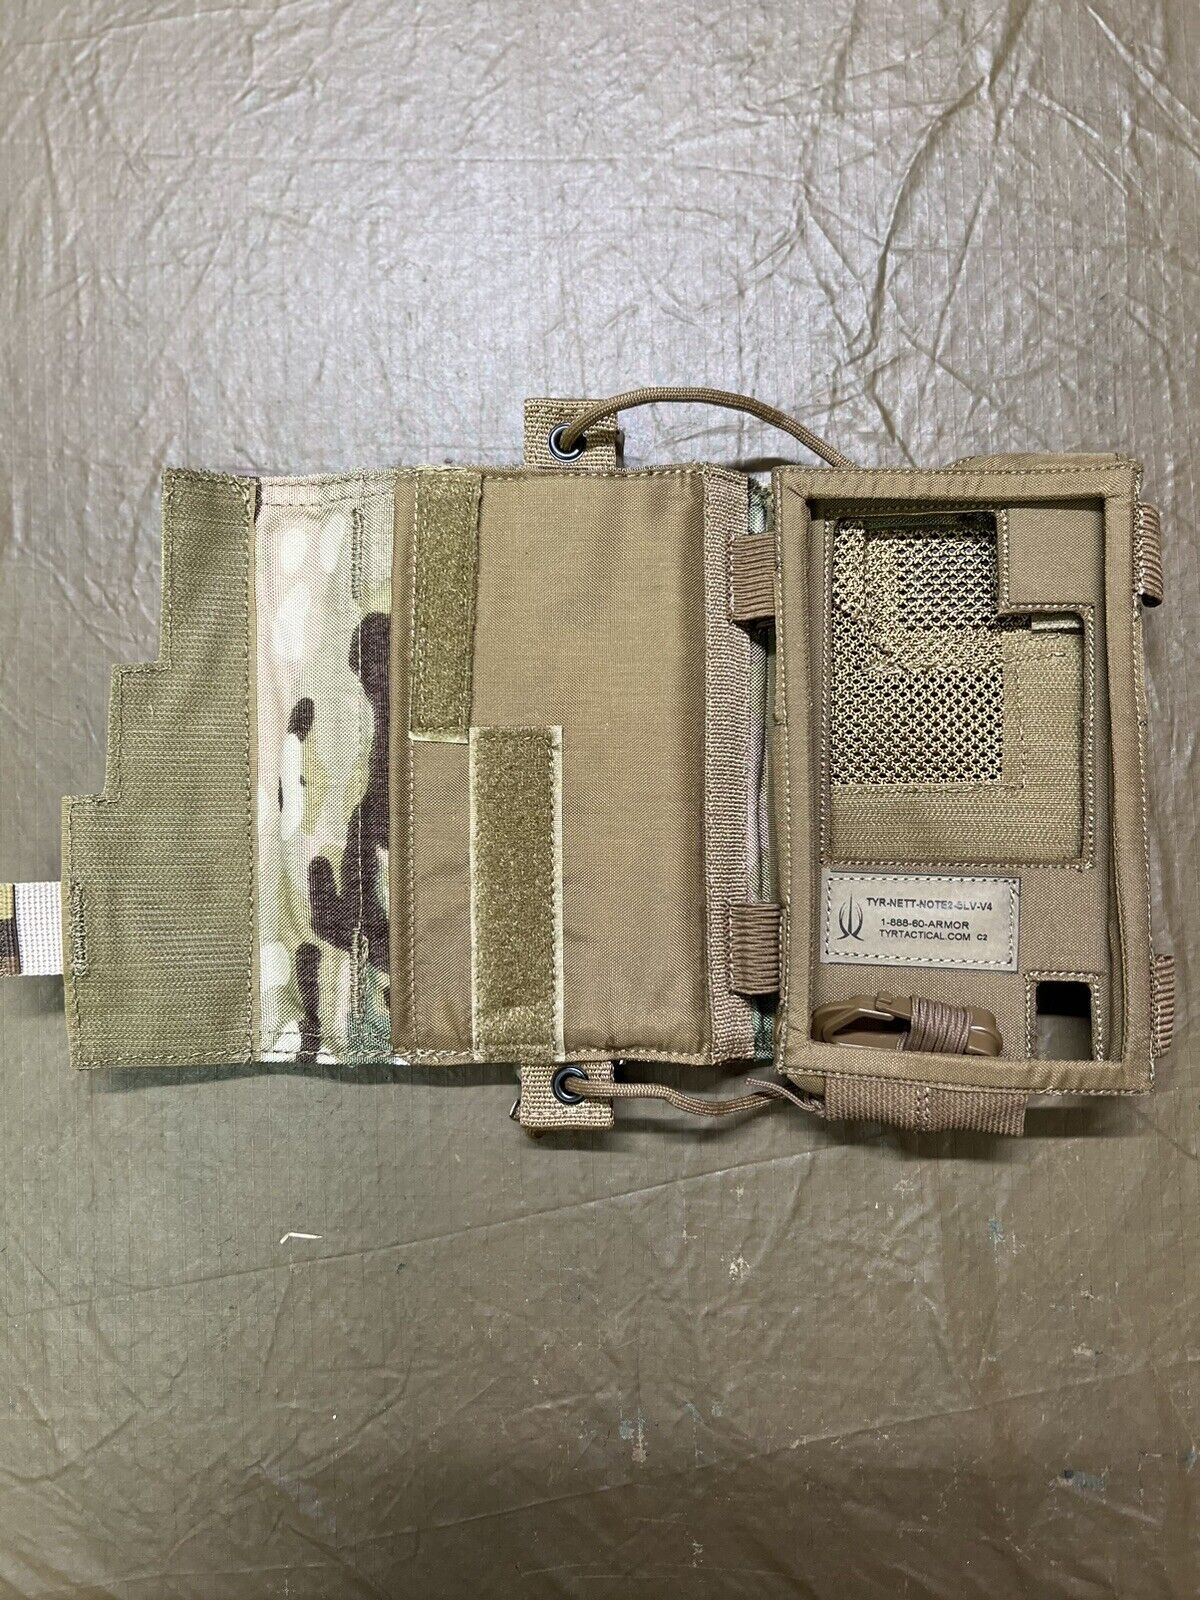 TYR TACTICAL MULTI-CAM PHONE POUCH SAMSUNG NOTE 2 V.4 END USER DEVICE W/SLEEVE